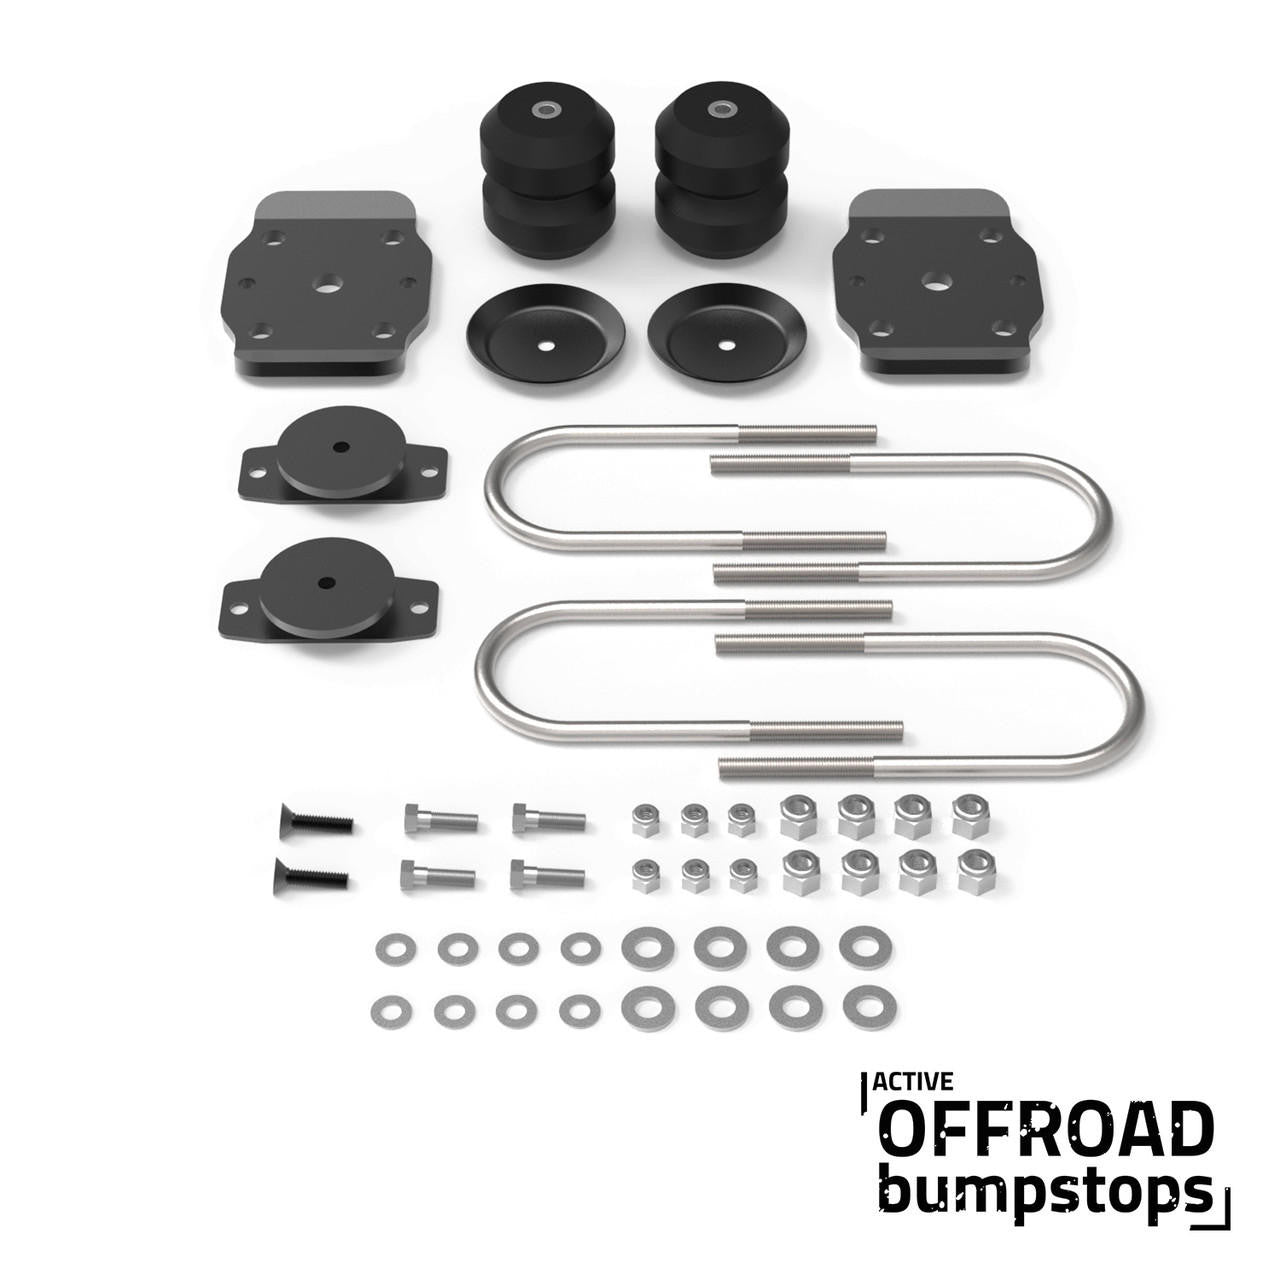 Timbren SES Active Off-Road Bumpstops with U-Bolt Flip Kit for 2015+ Chevy Colorado/GMC Canyon, Front Kit ABSGMFK 